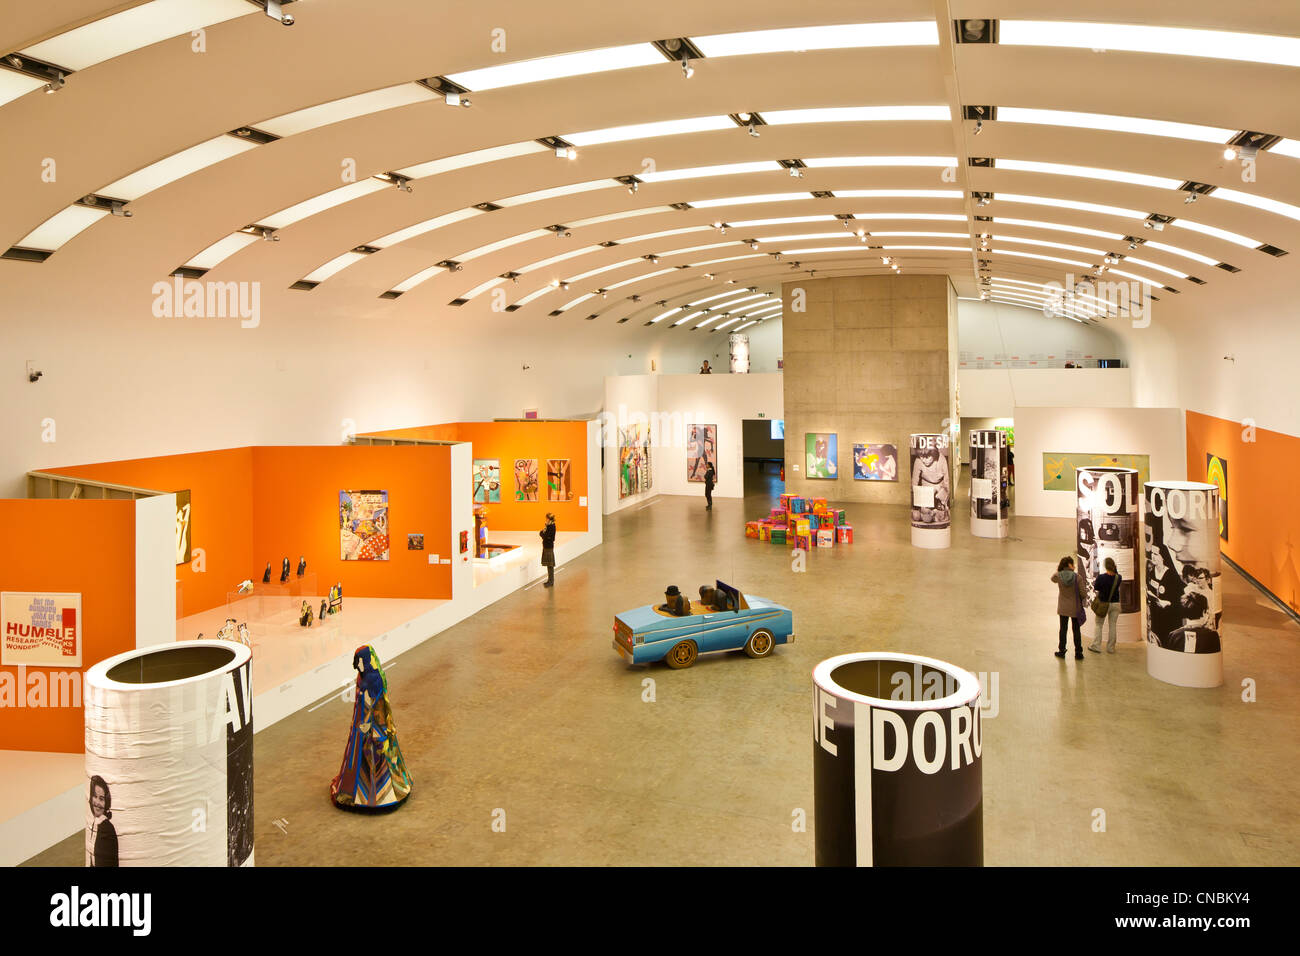 Austria, Vienna, MuseumsQuartier, Kunsthalle Wien, Museum of Modern and Contemporary International Art, exhibition Power Up = Stock Photo